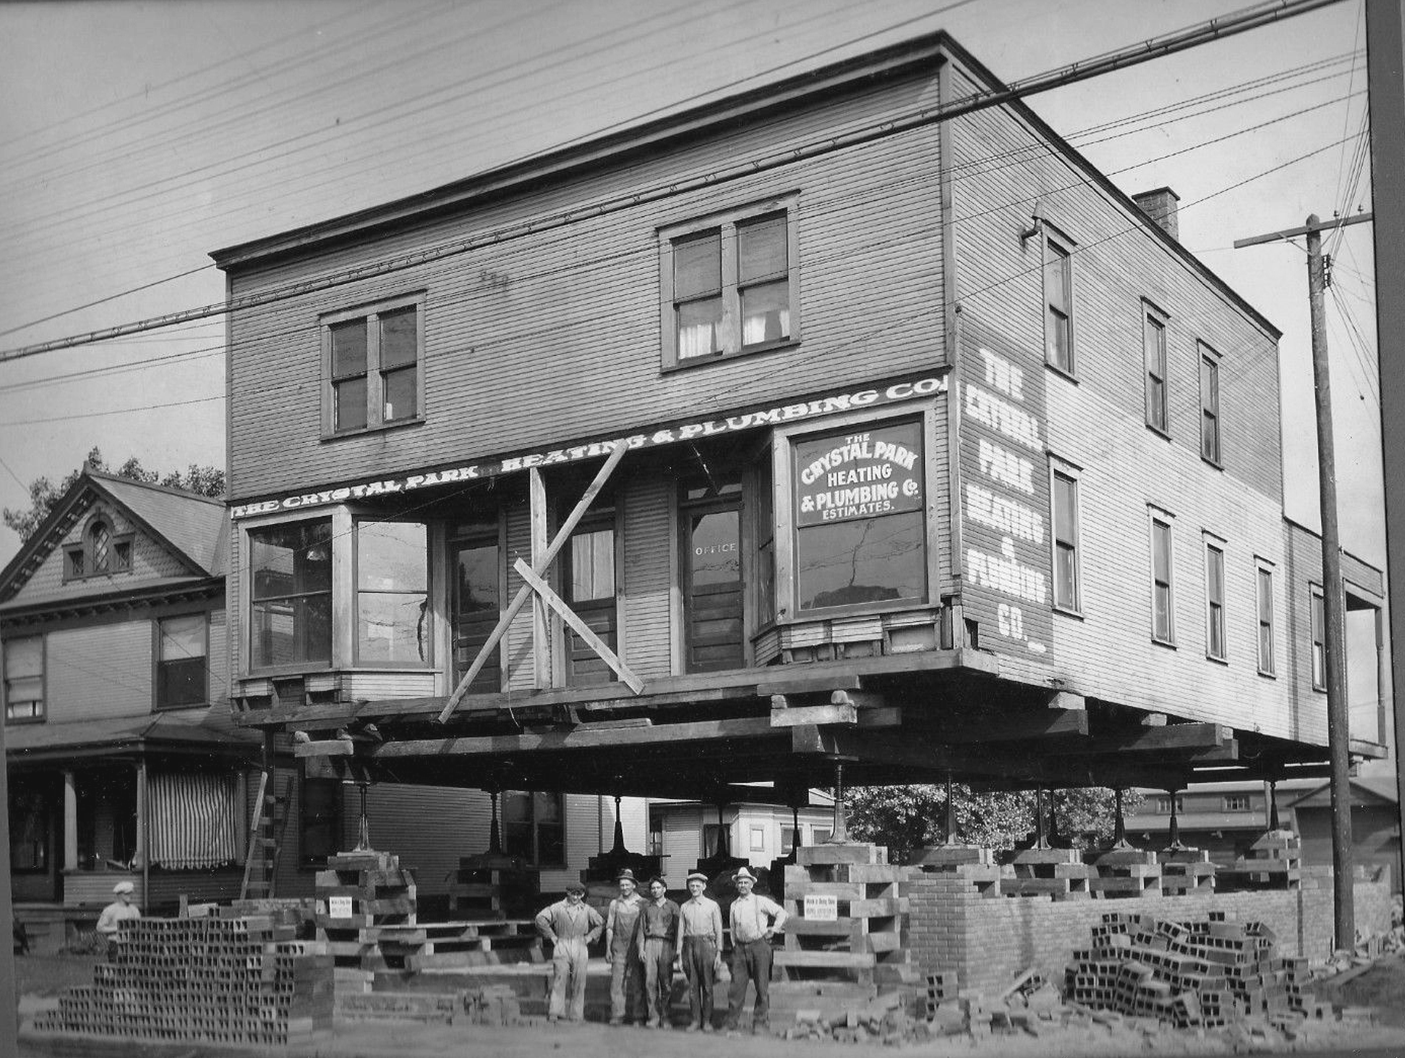 Lifting a Ca. 1900 Commercial Store for a New Foundation